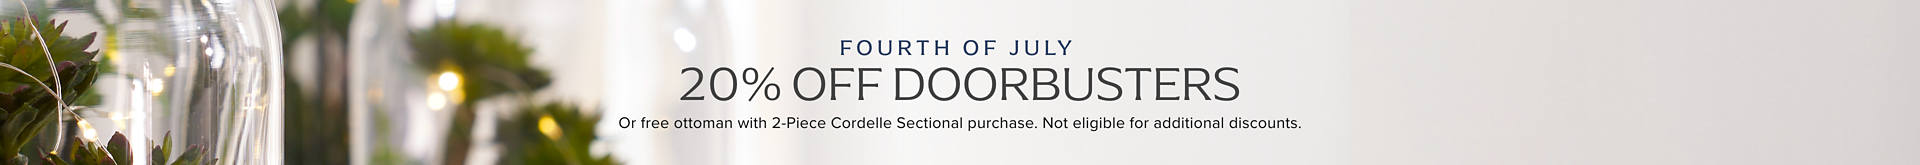 20% Off 4th of July Doorbusters